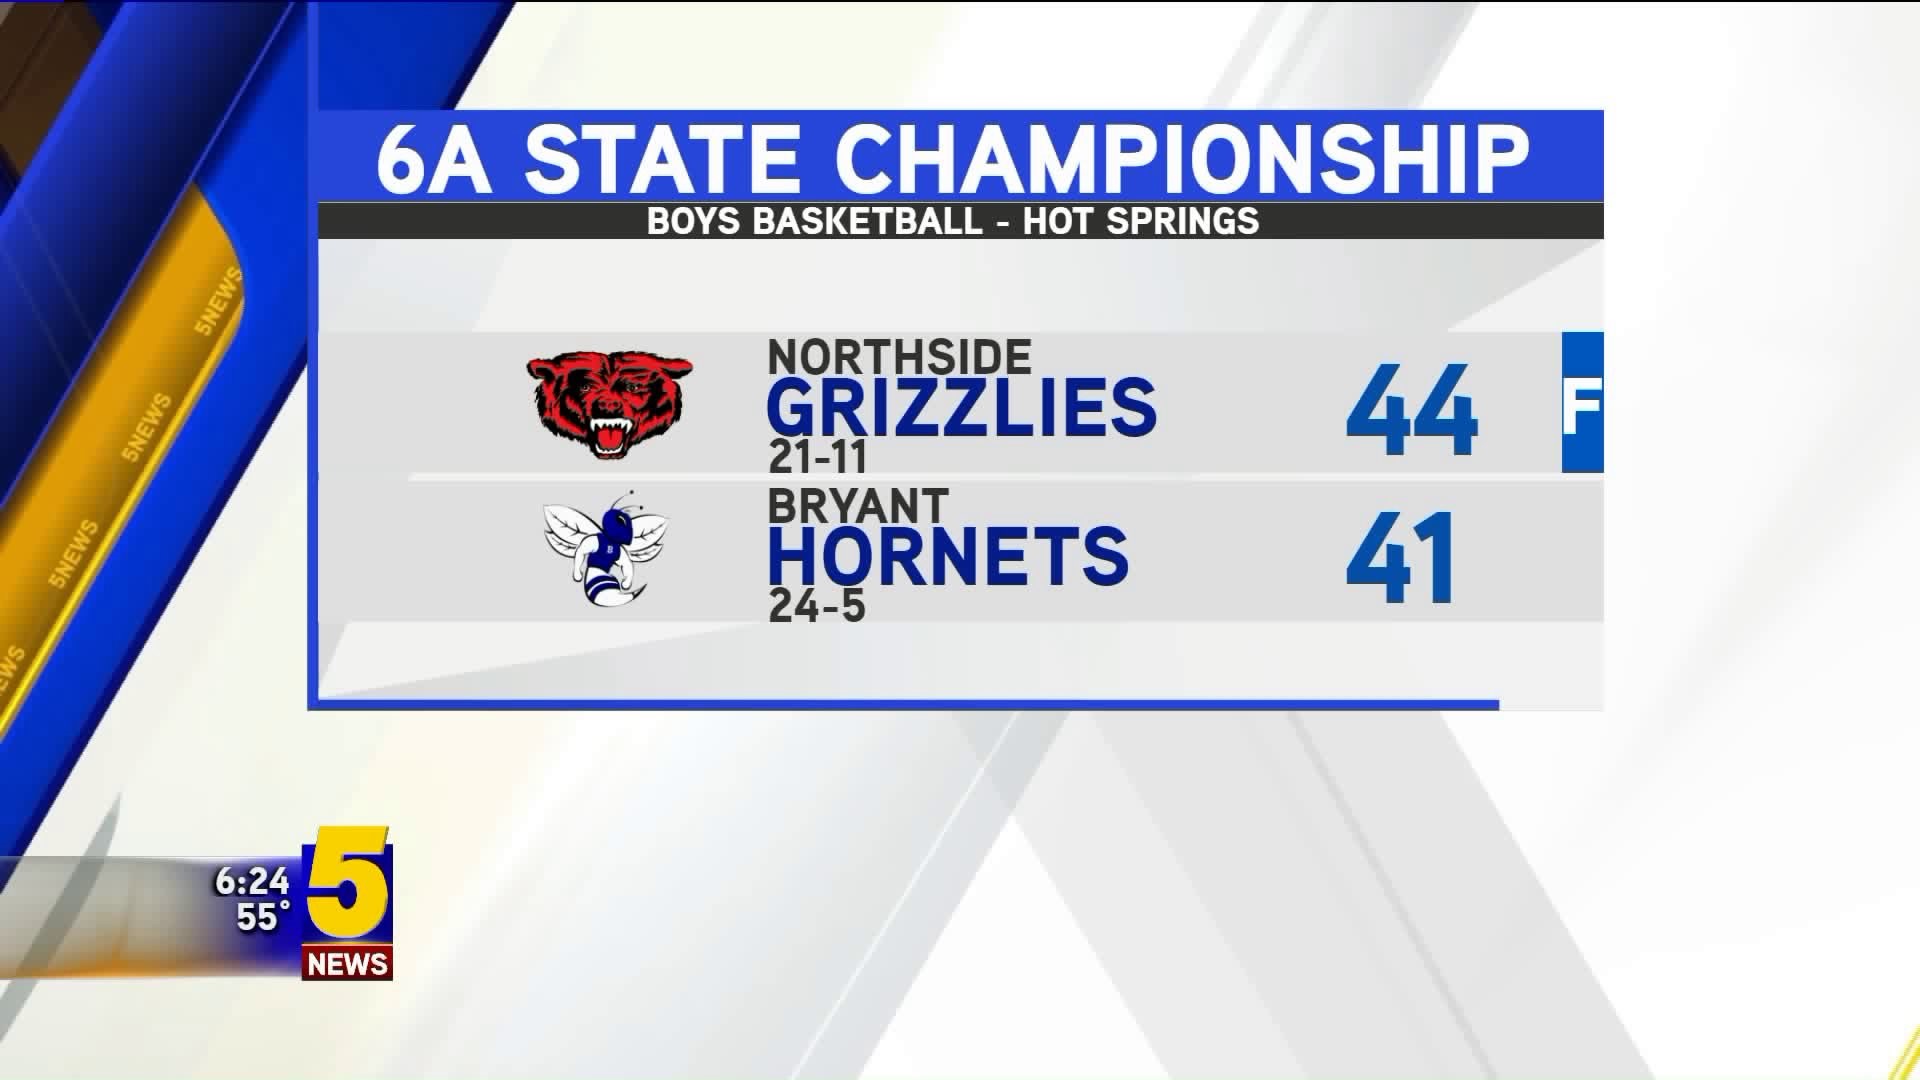 Grizzly Boys Complete Sweep, Win 2nd Title in 3 Years